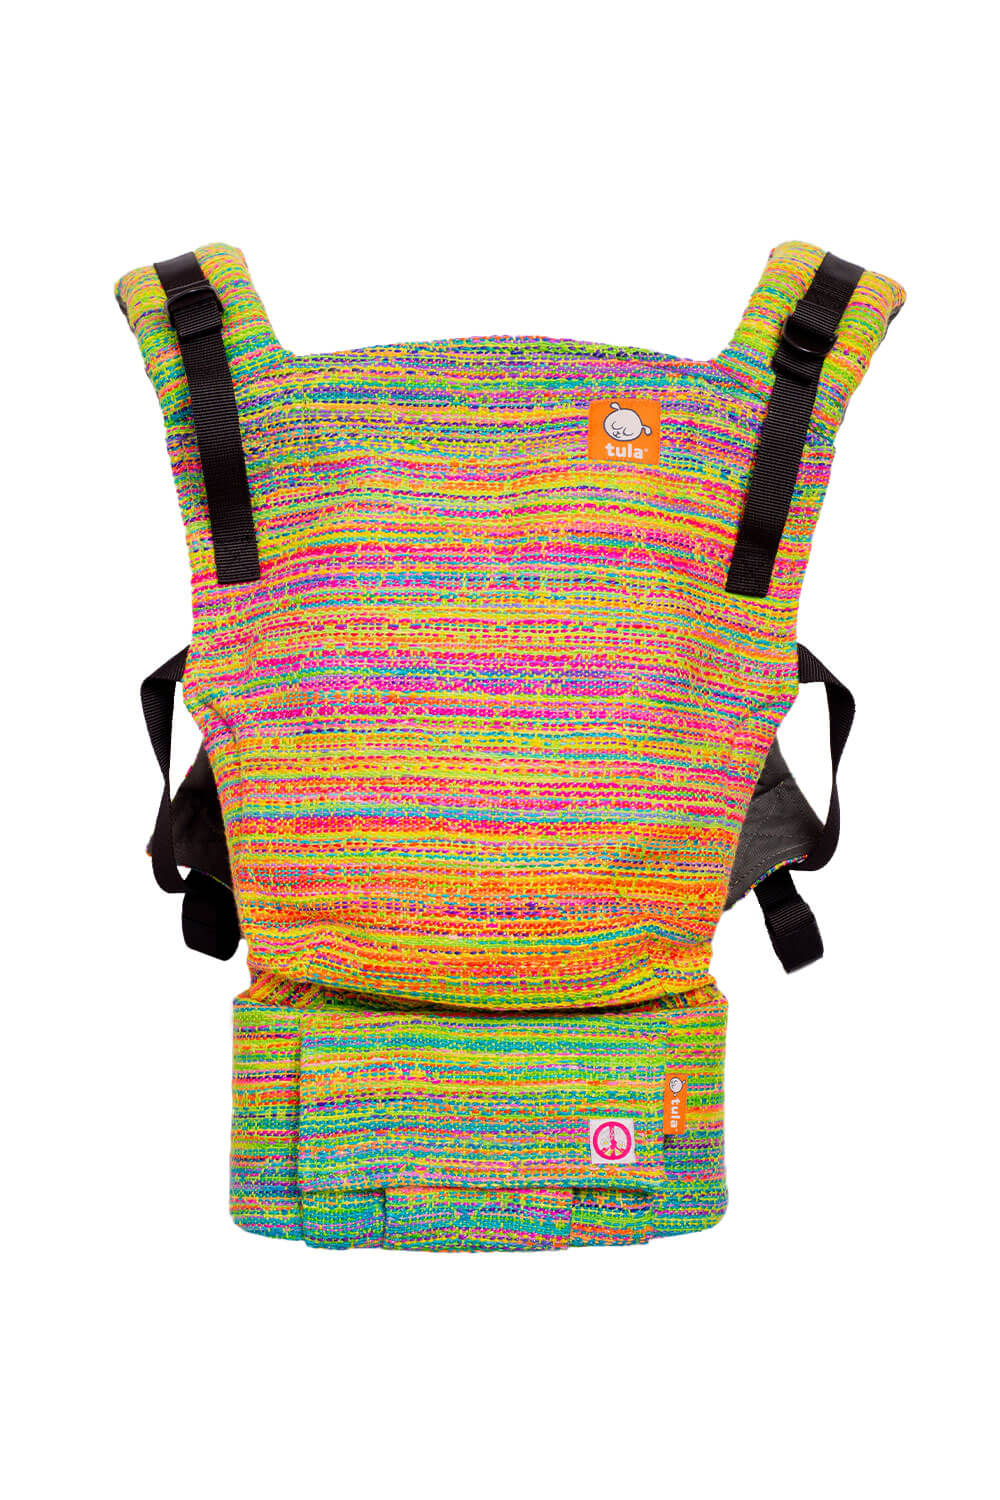 Tell Me a Secret - Signature Handwoven Free-to-Grow Baby Carrier